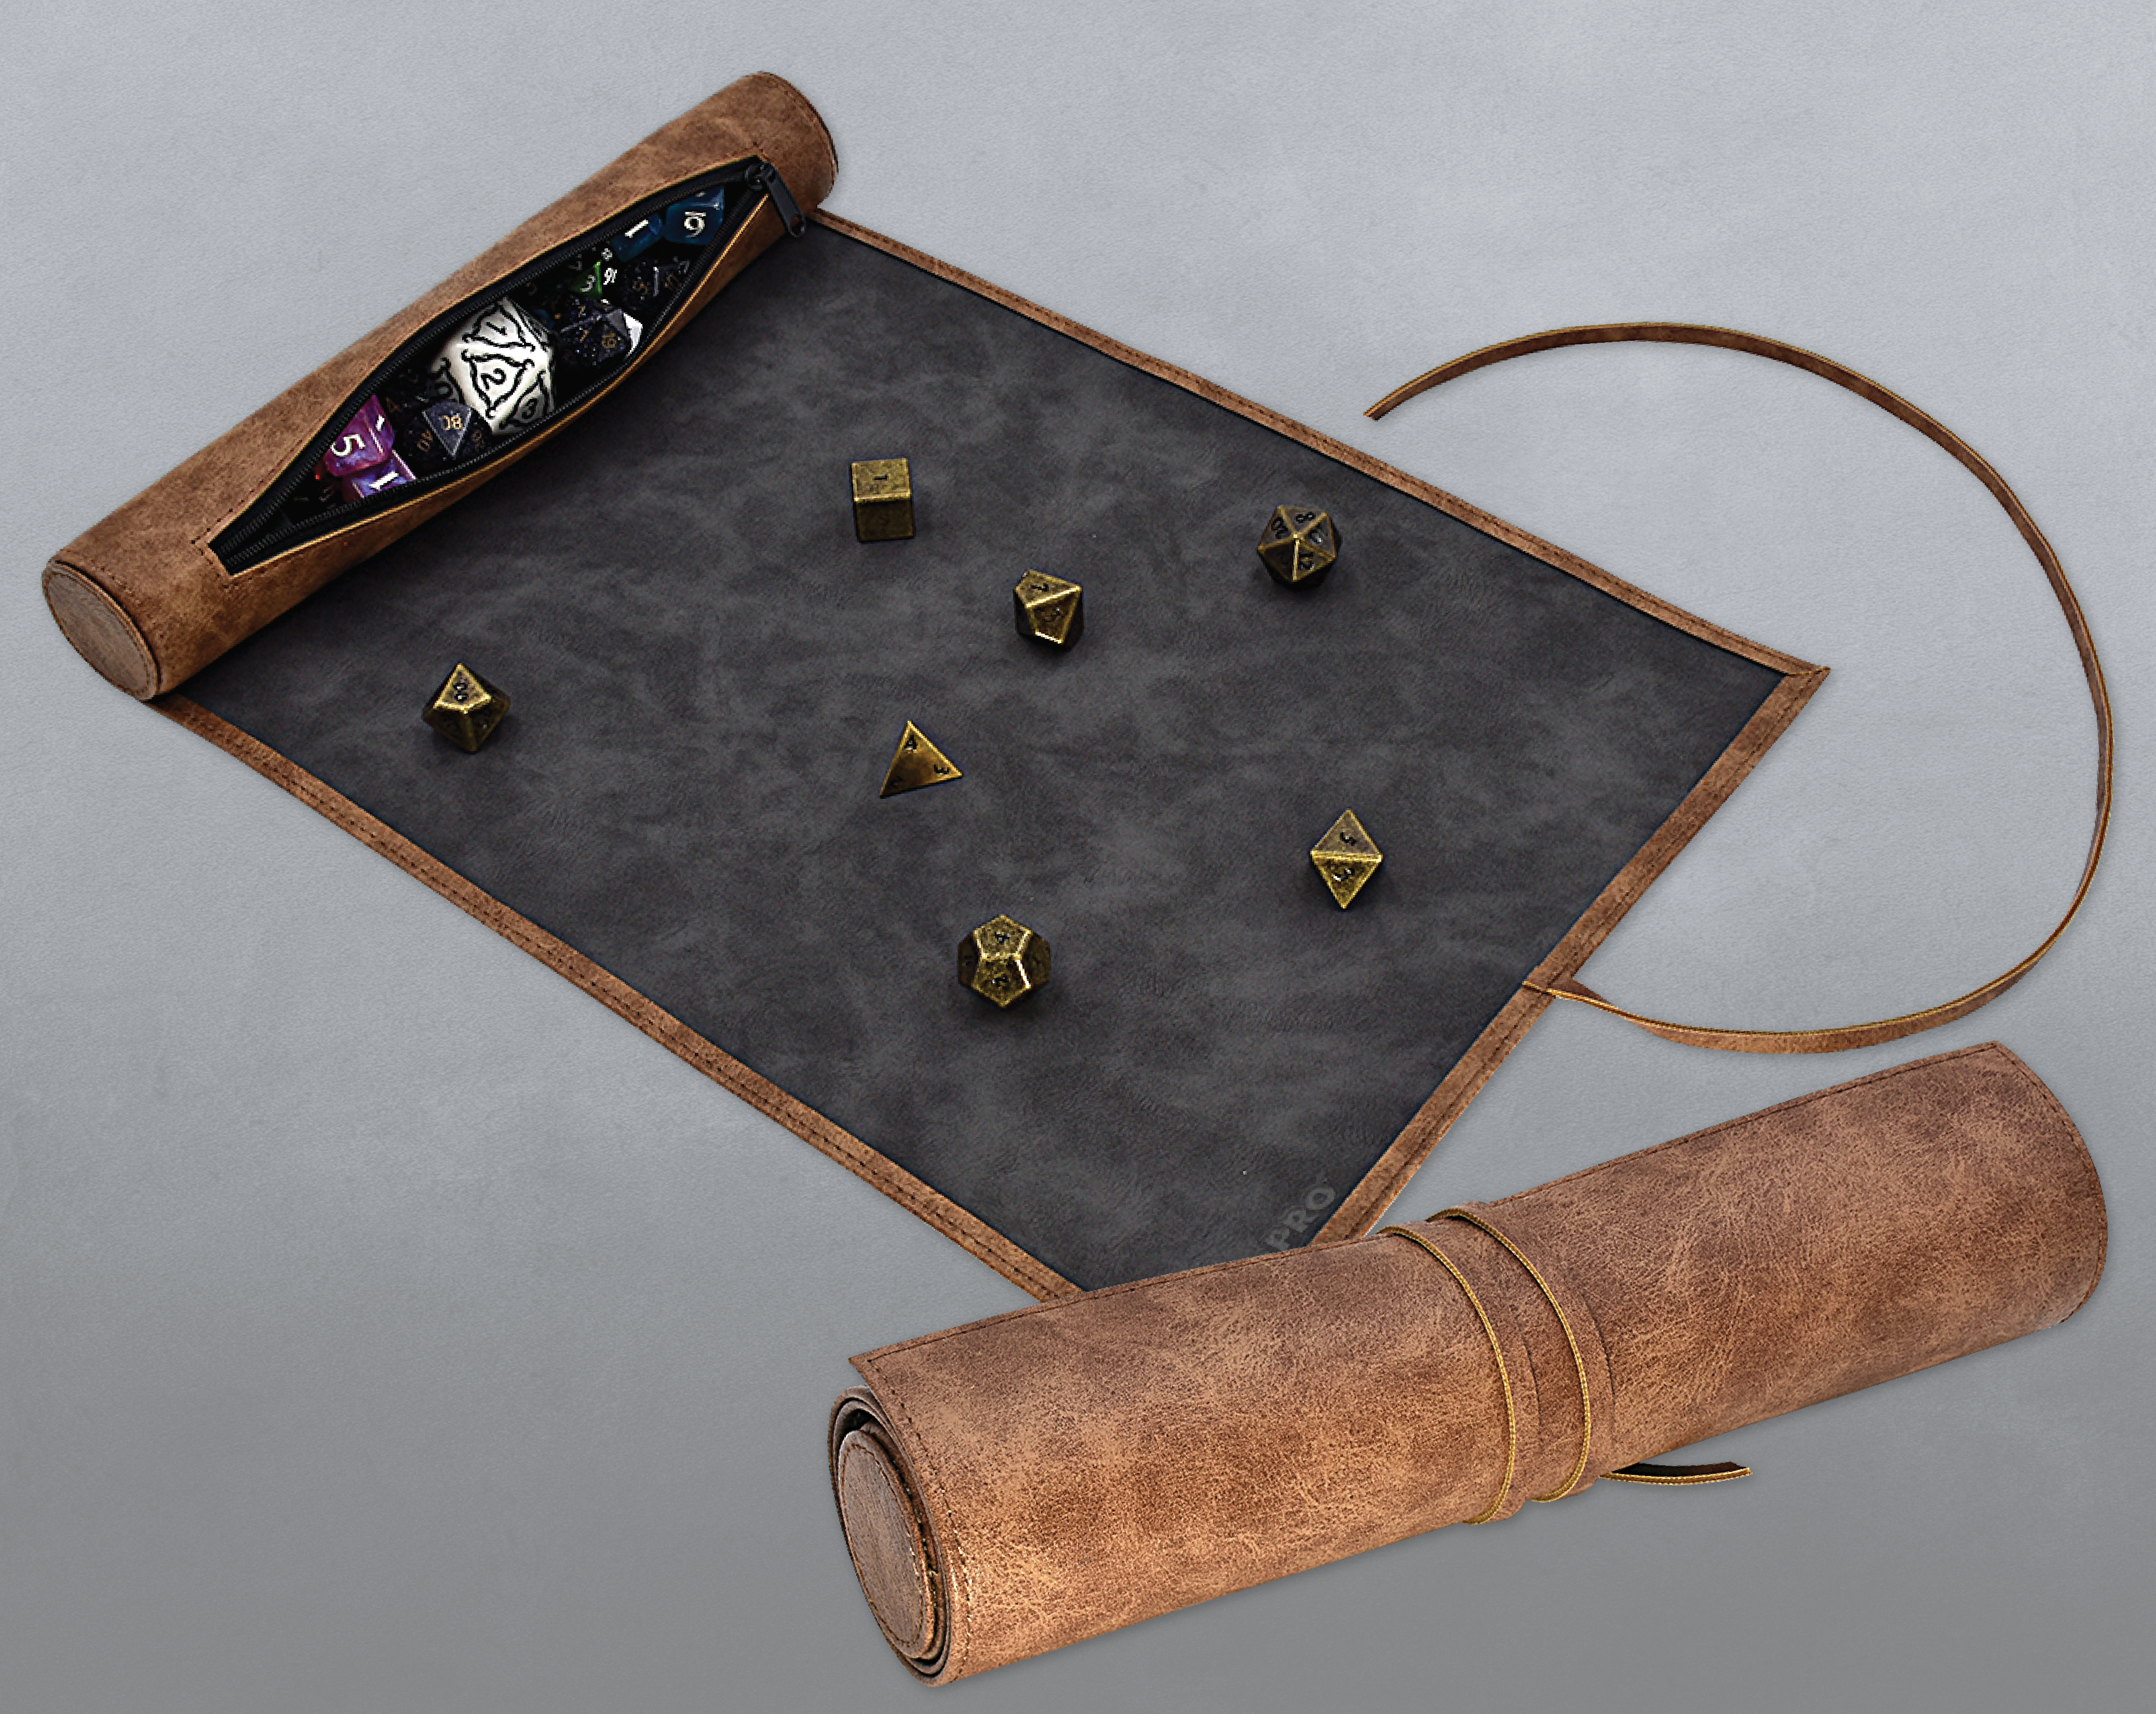 UP DICE SCROLL | The CG Realm